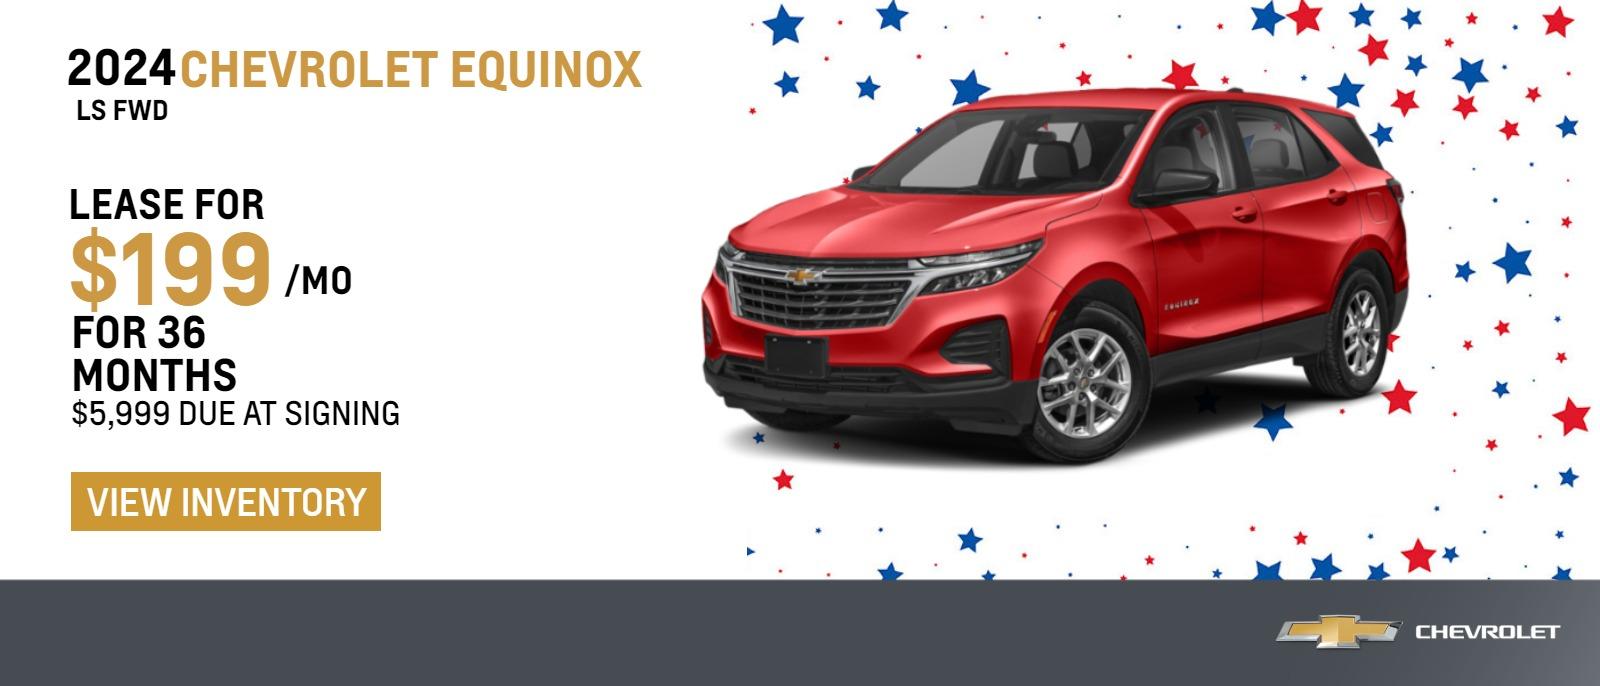 2024 Chevrolet Equinox LS FWD
$199 Month Lease | 36 Months | $5999 Due at signing